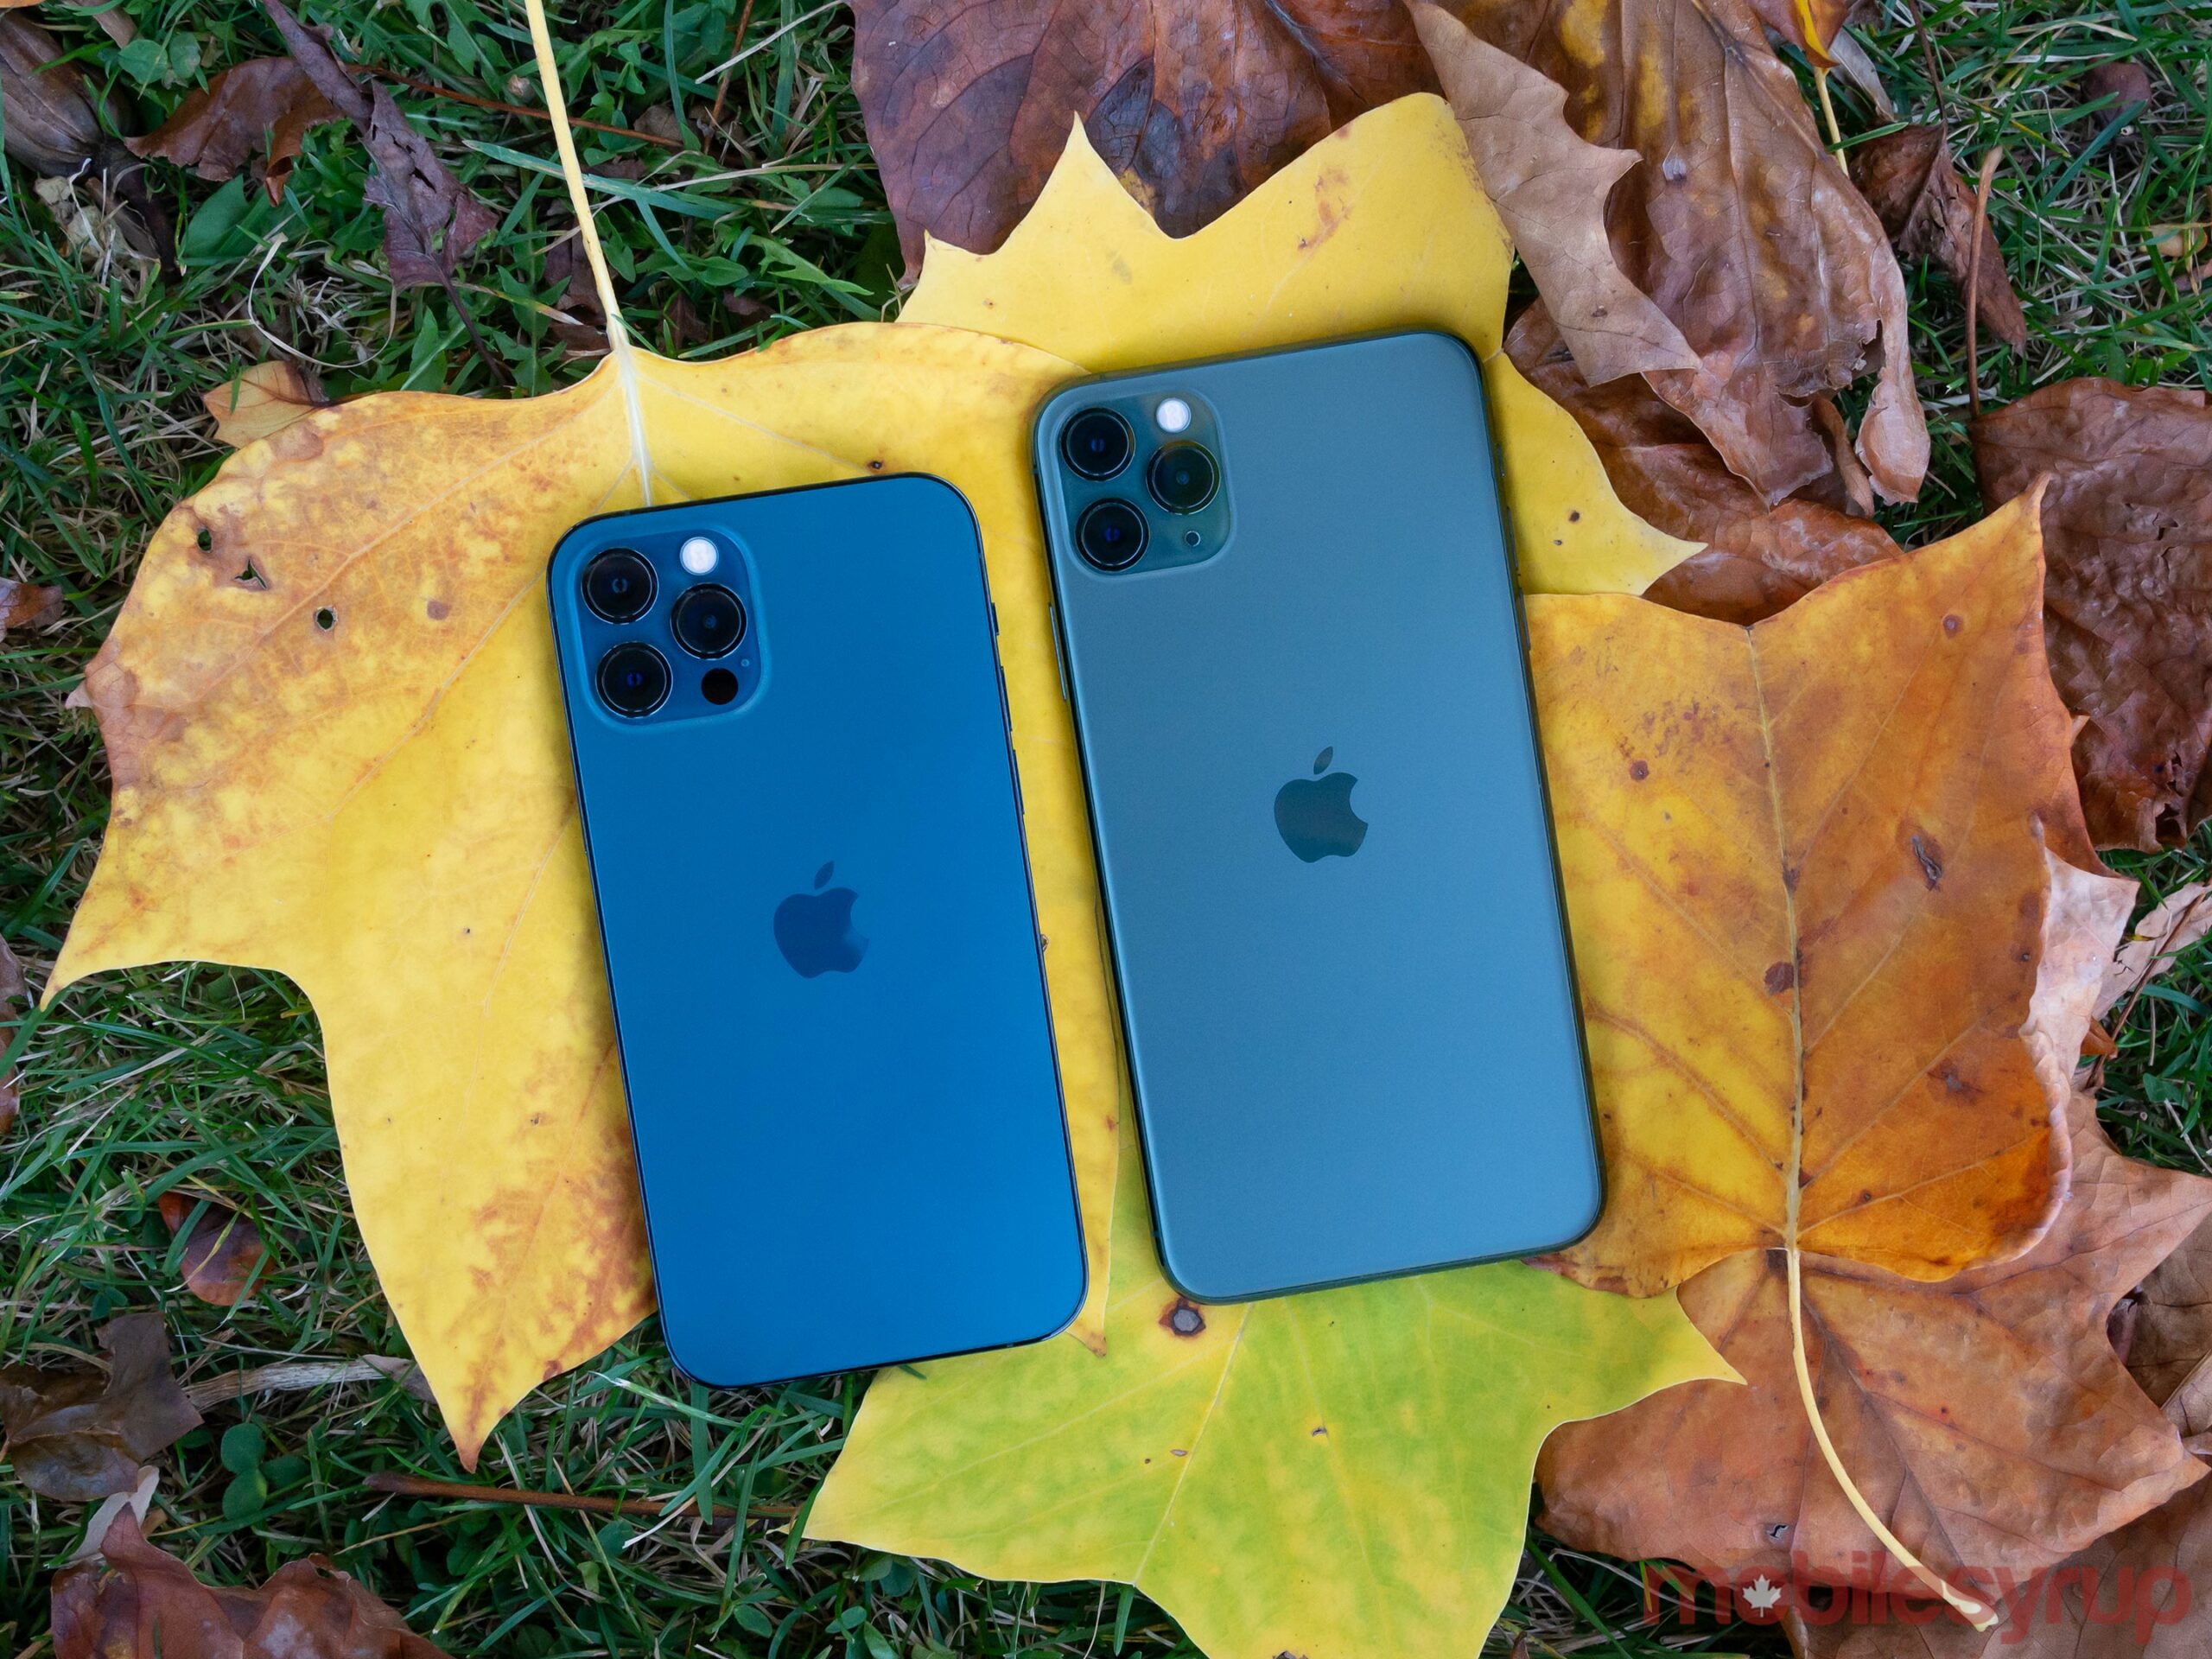 iPhone 12 Pro and iPhone 11 Pro Max